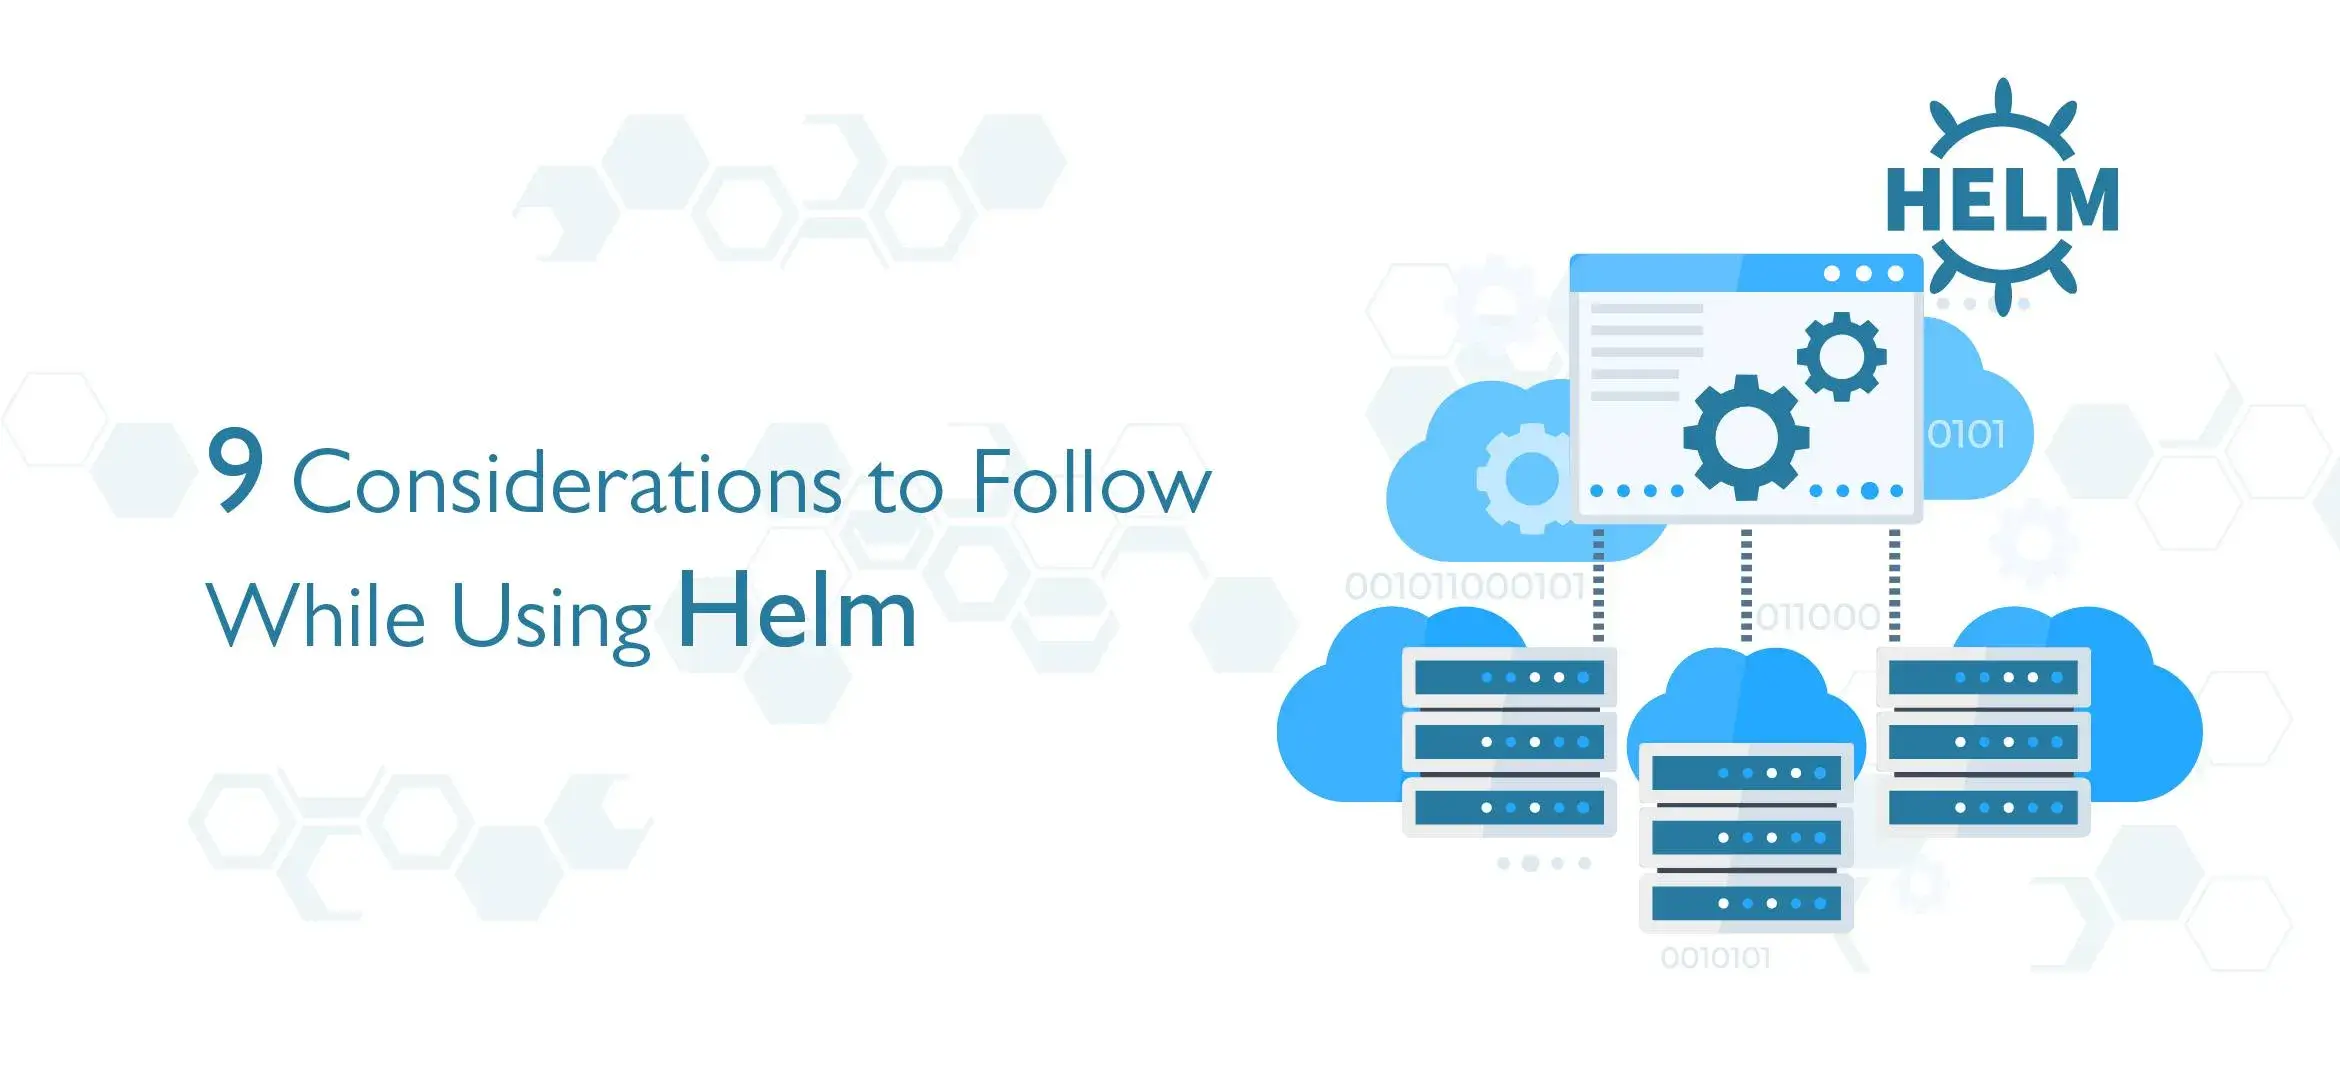 17122340149 Considerations to Follow While Using Helm.webp